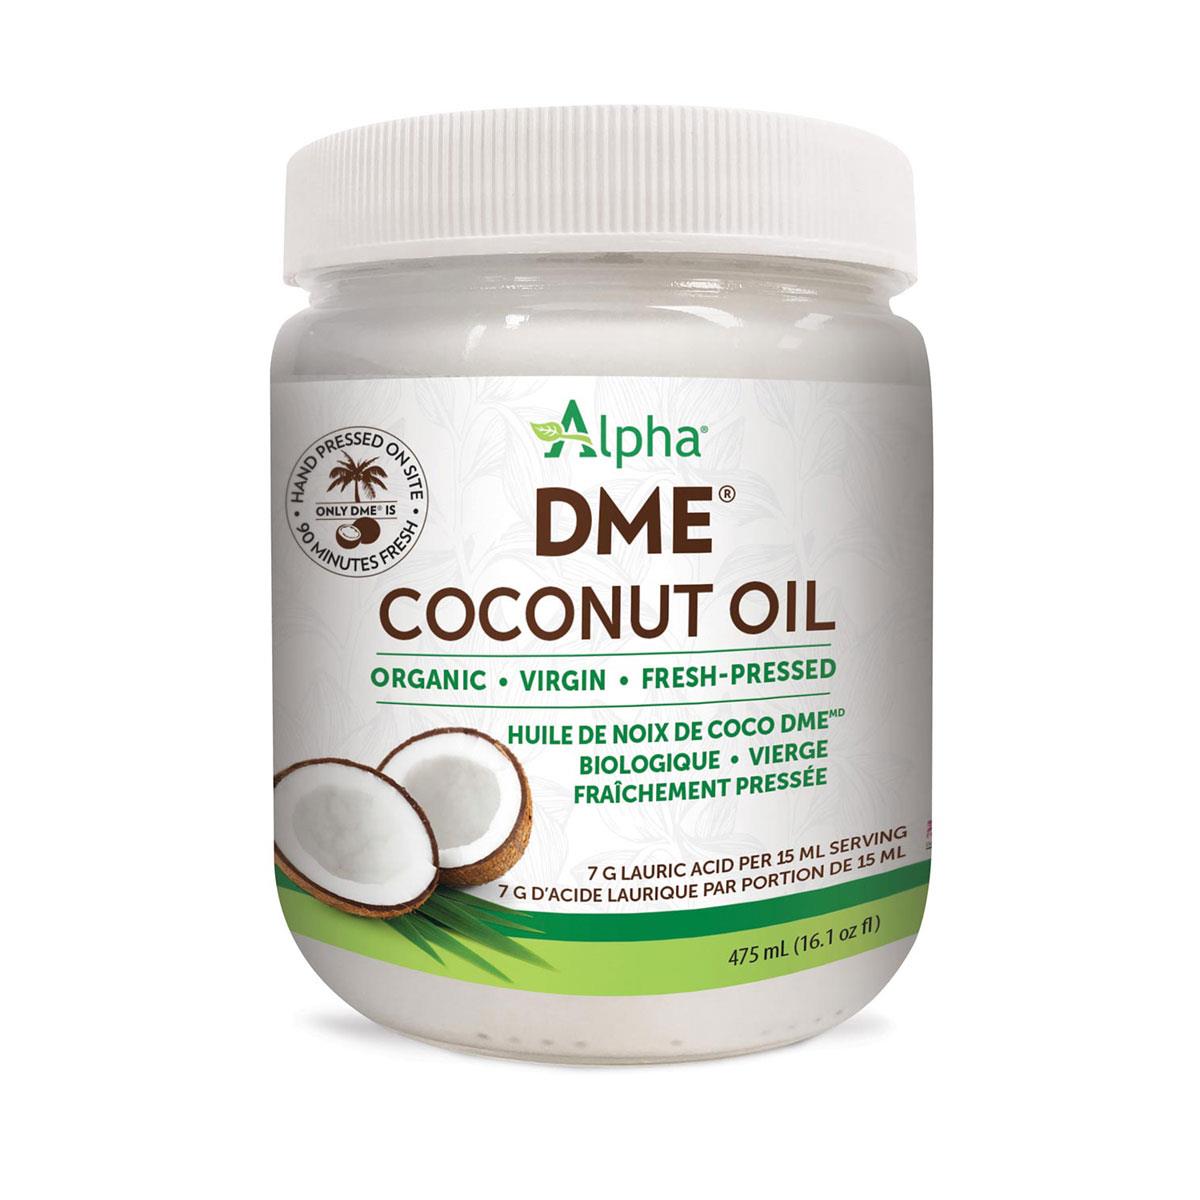 ALPHA HEALTH PRODUCTS COCONUT OIL DME ORGANIC, 475ML